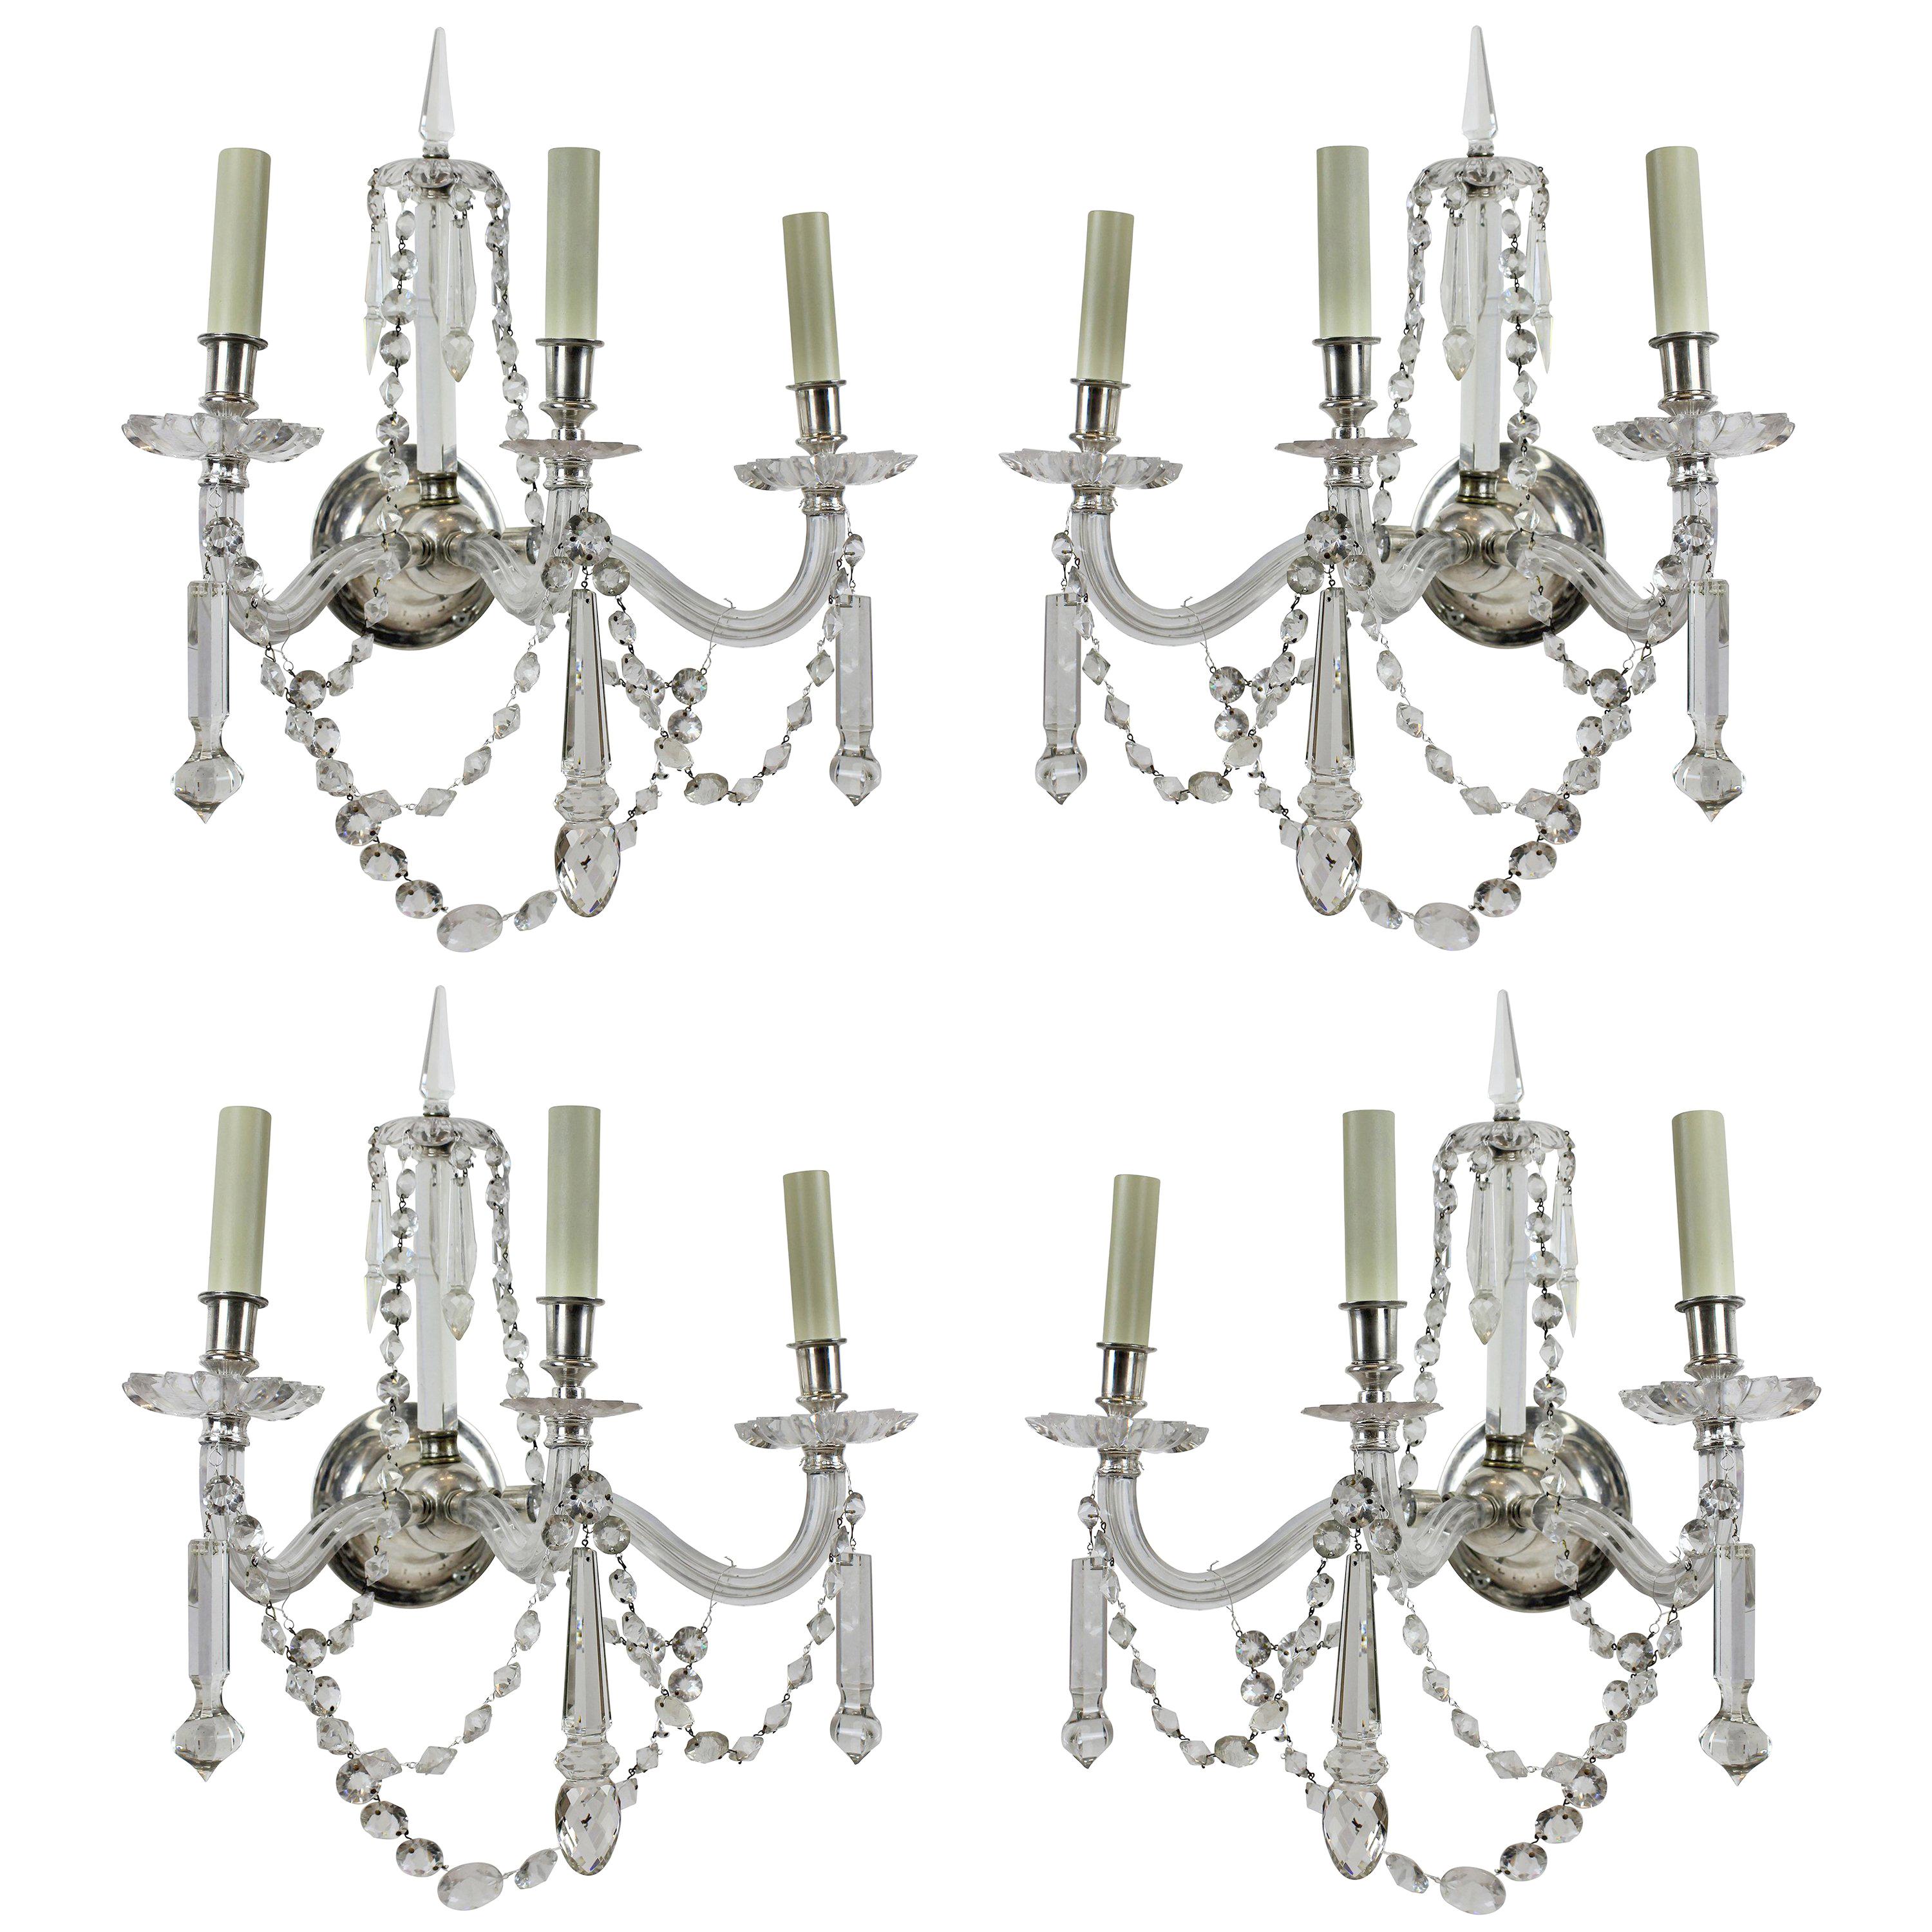 A fine set of four English cut-glass, three branch wall sconces. Beautifully hung with swags and spires.
            